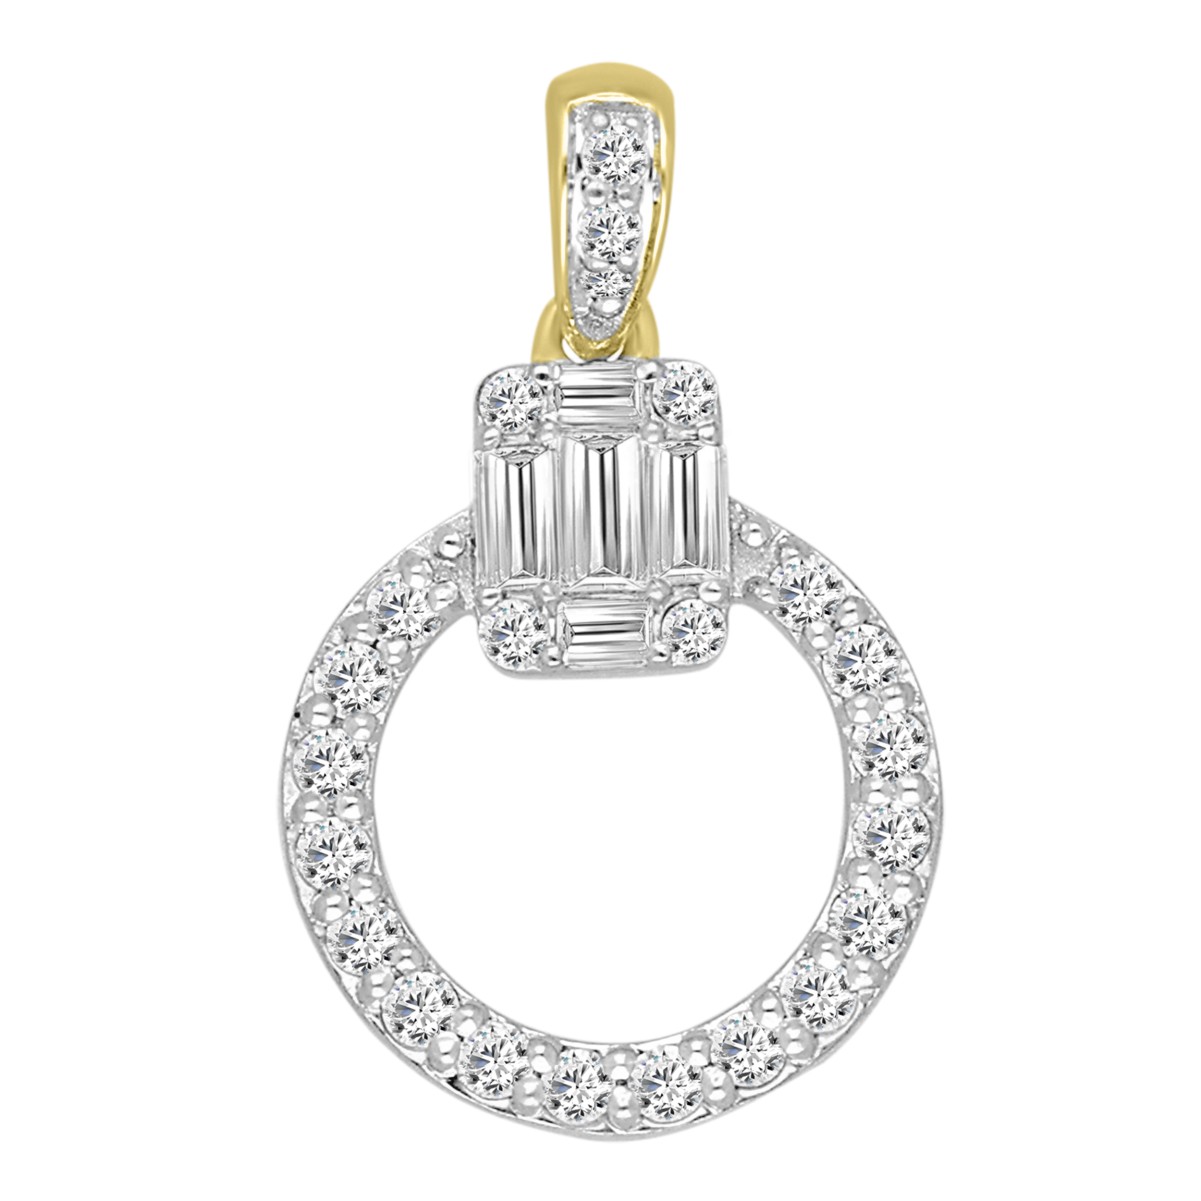 14K YELLOW GOLD 1/3CT ROUND/BAGUETTE DIAMOND LADIES PENDANT WITH CHAIN 